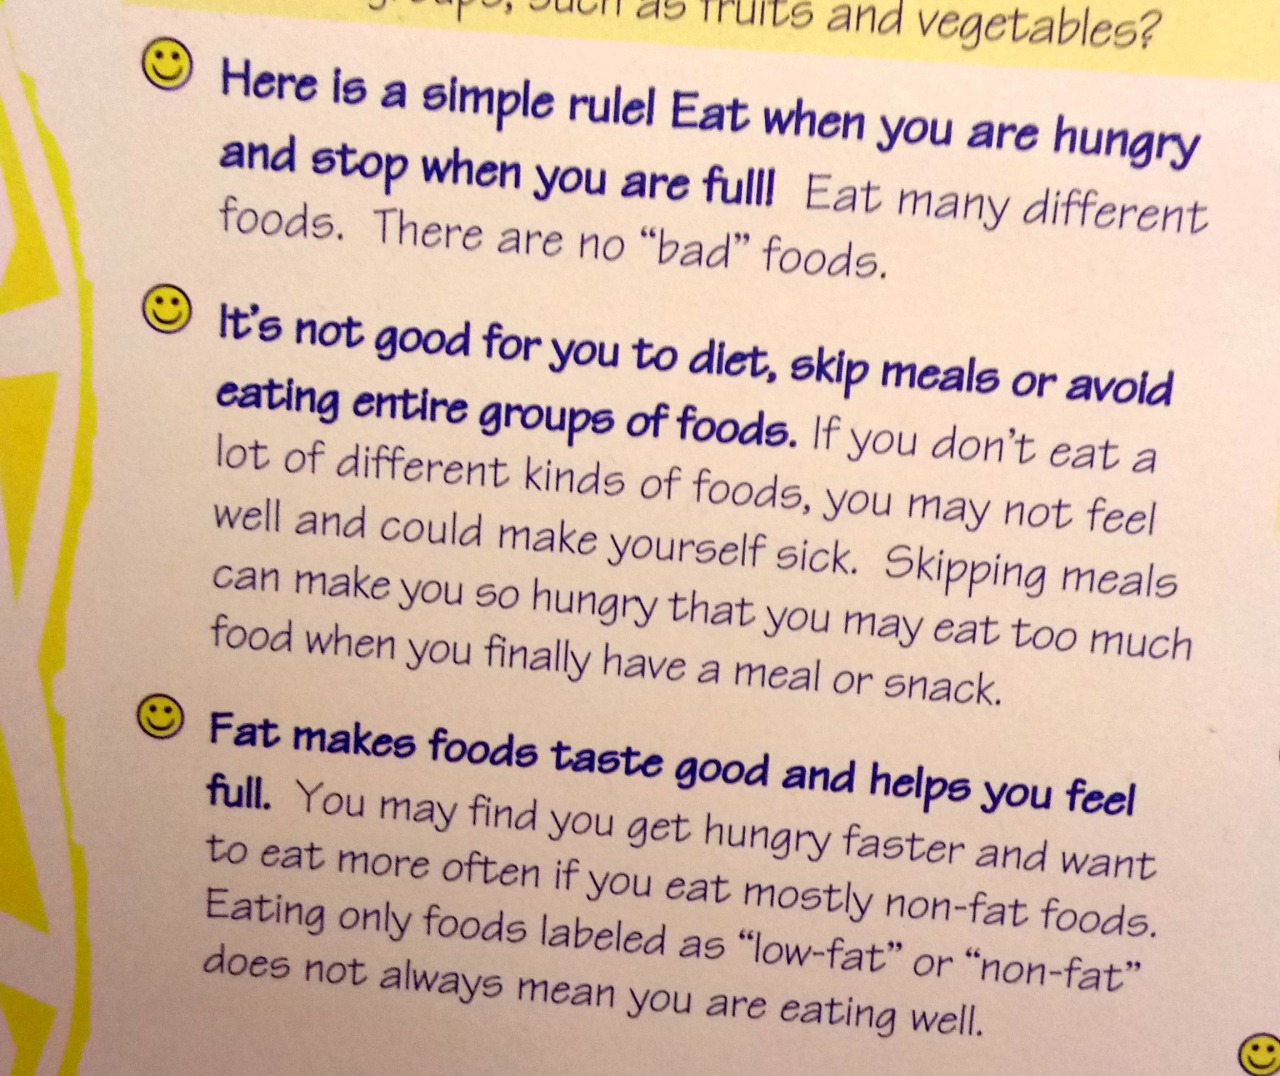 tha-mi-beo:
“bogleech:
“pretty real shit on this poster at our doctor’s office actually
”
Image reads:
• Here is a simple rule, eat when you are hungry and stop when you are full. Eat many different foods. There are no “bad” foods.
• It’s not good...